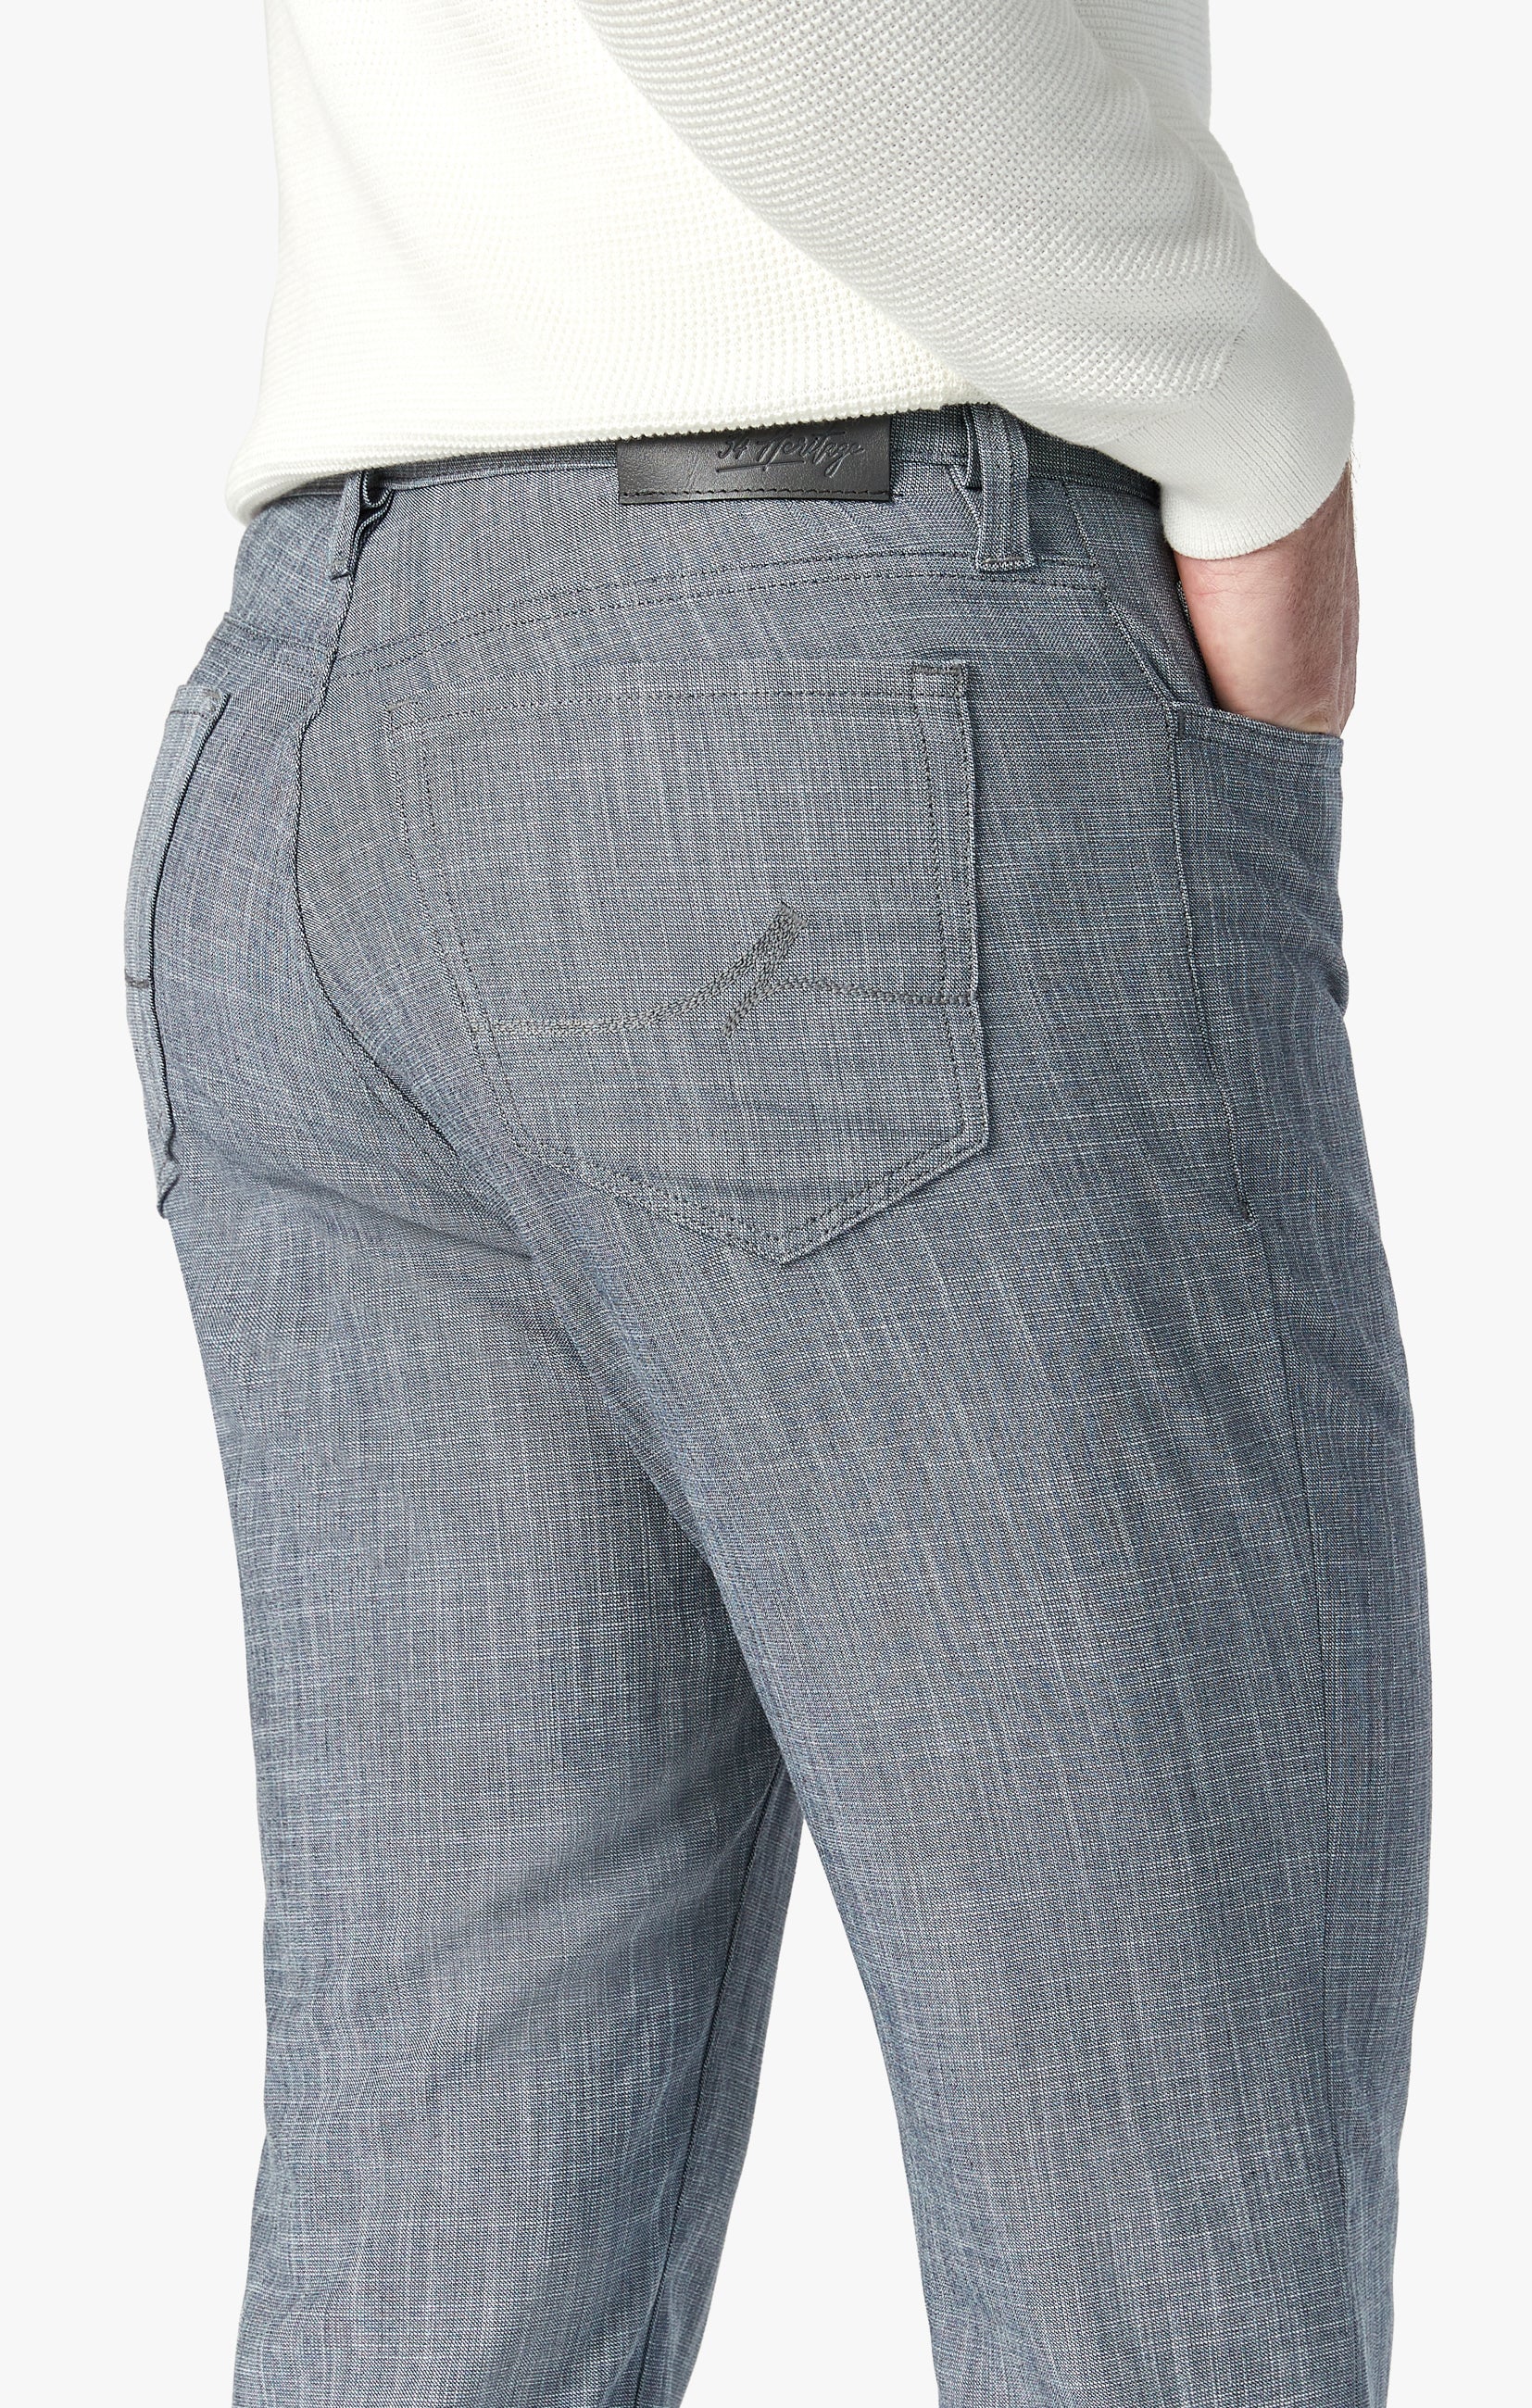 Charisma Relaxed Straight Pants in Grey Cross Twill Image 5